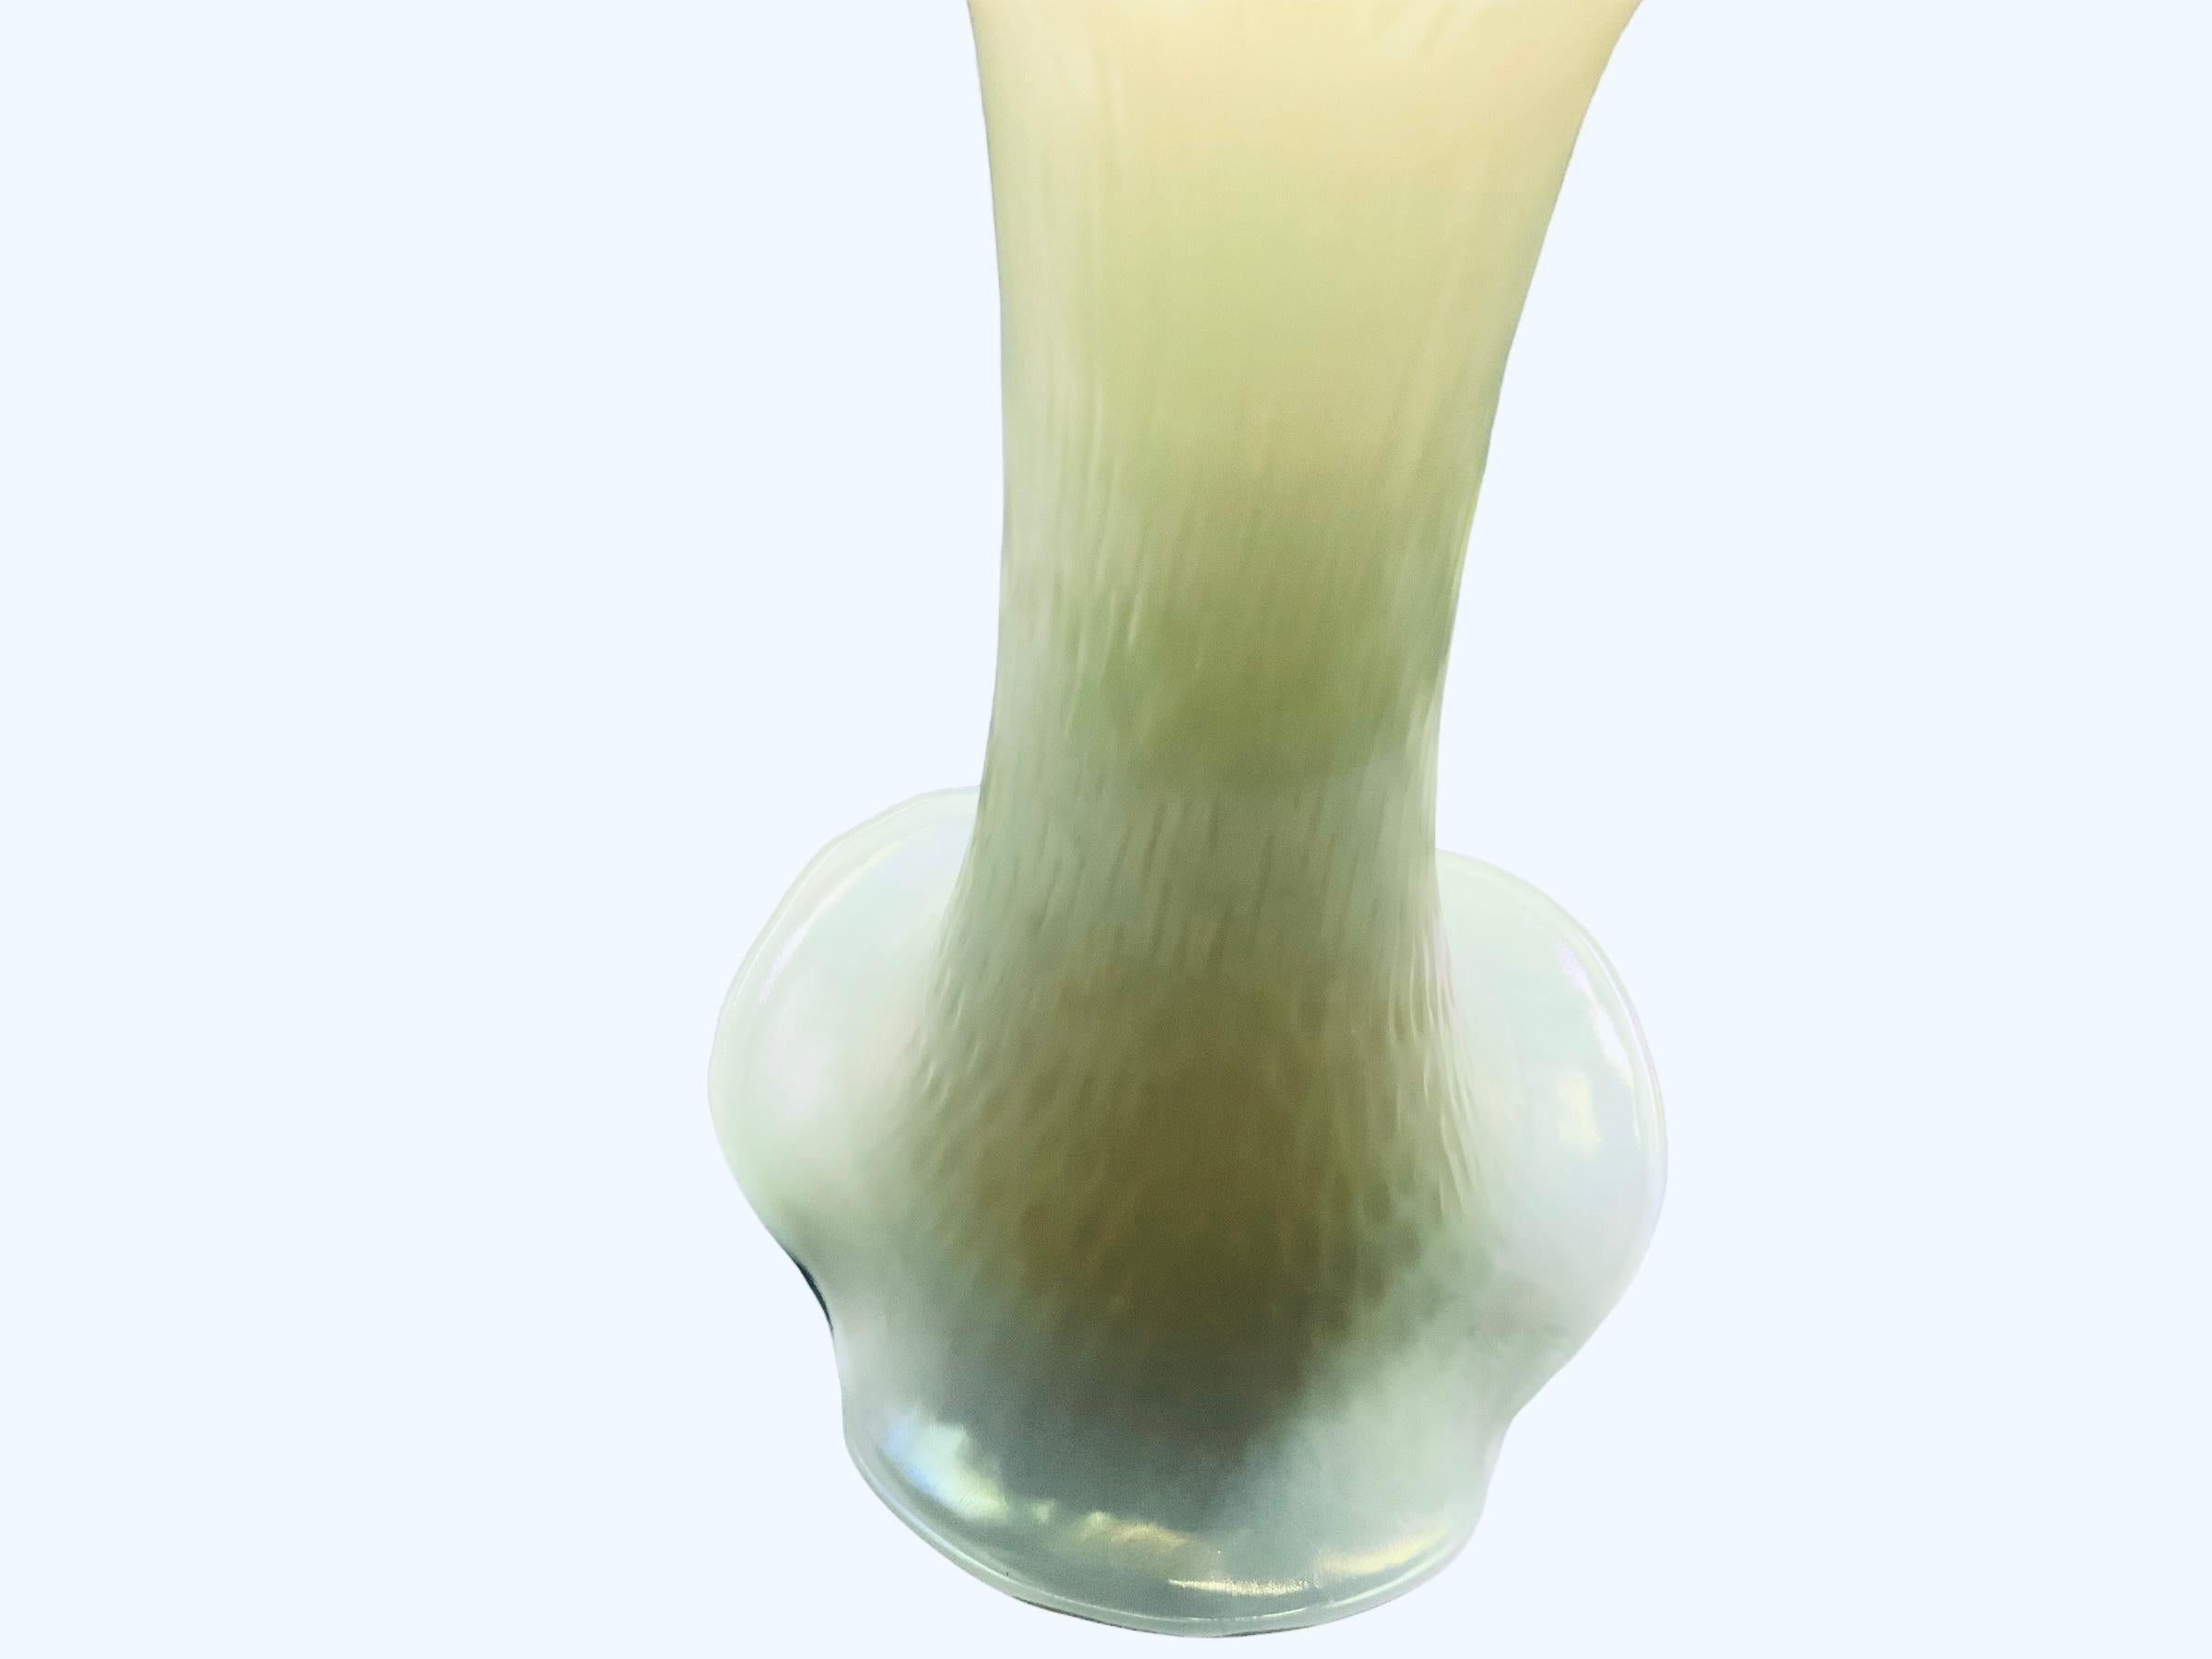 This is a medium size Art Glass flower vase. It depicts a  pearly opaline glass flower vase with wide ruffles upper border. The whole vase is adorned with “rainy drops” marks.